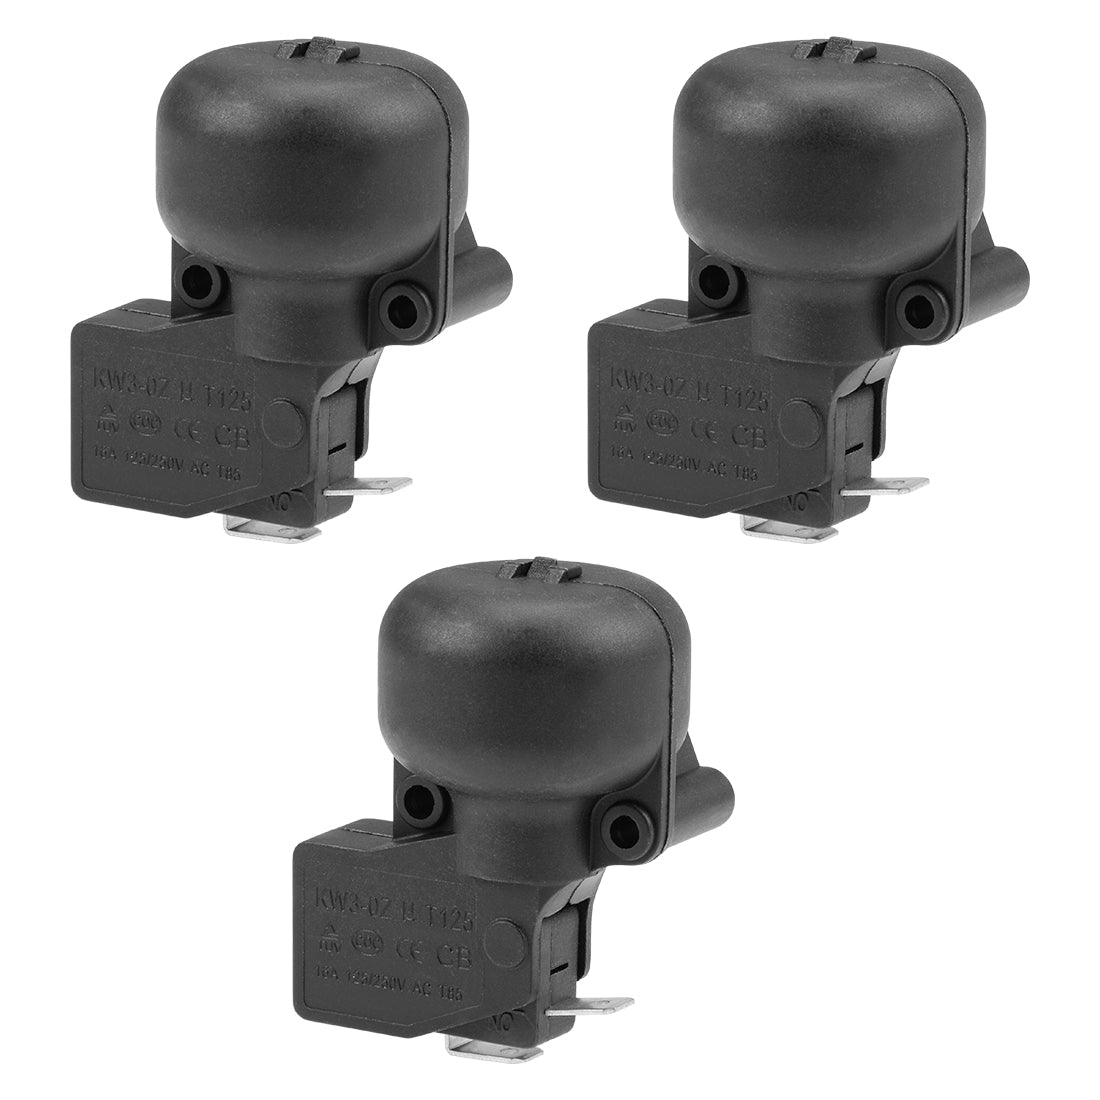 uxcell Uxcell Tip Over Switch AC 125V/250V 16A Anti Tilt Dump Switch for Patio Garden Heaters Electric Fan 3pcs